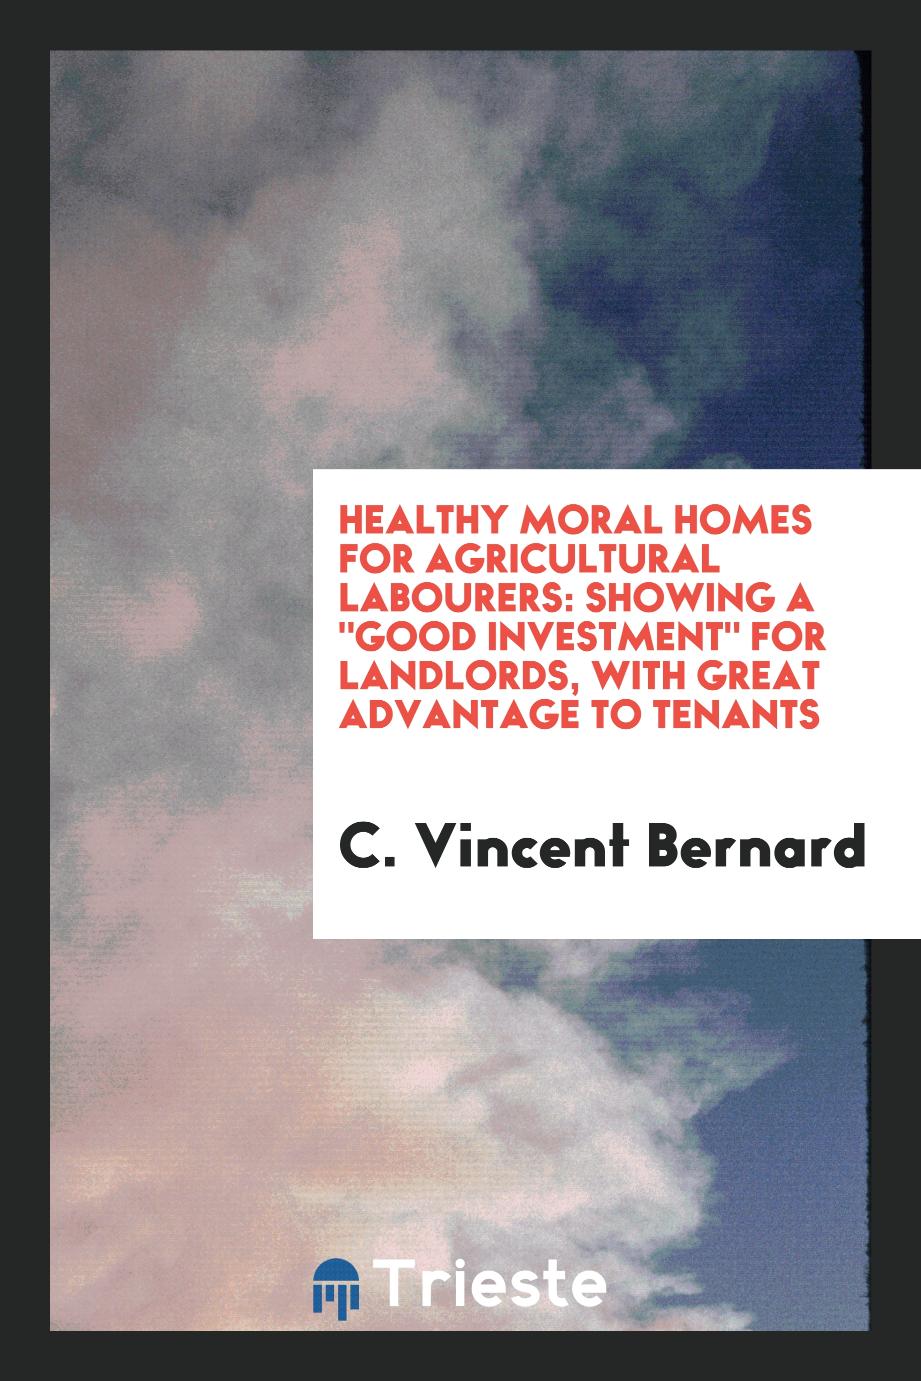 Healthy Moral Homes for Agricultural Labourers: Showing a "Good Investment" for Landlords, with Great Advantage to Tenants